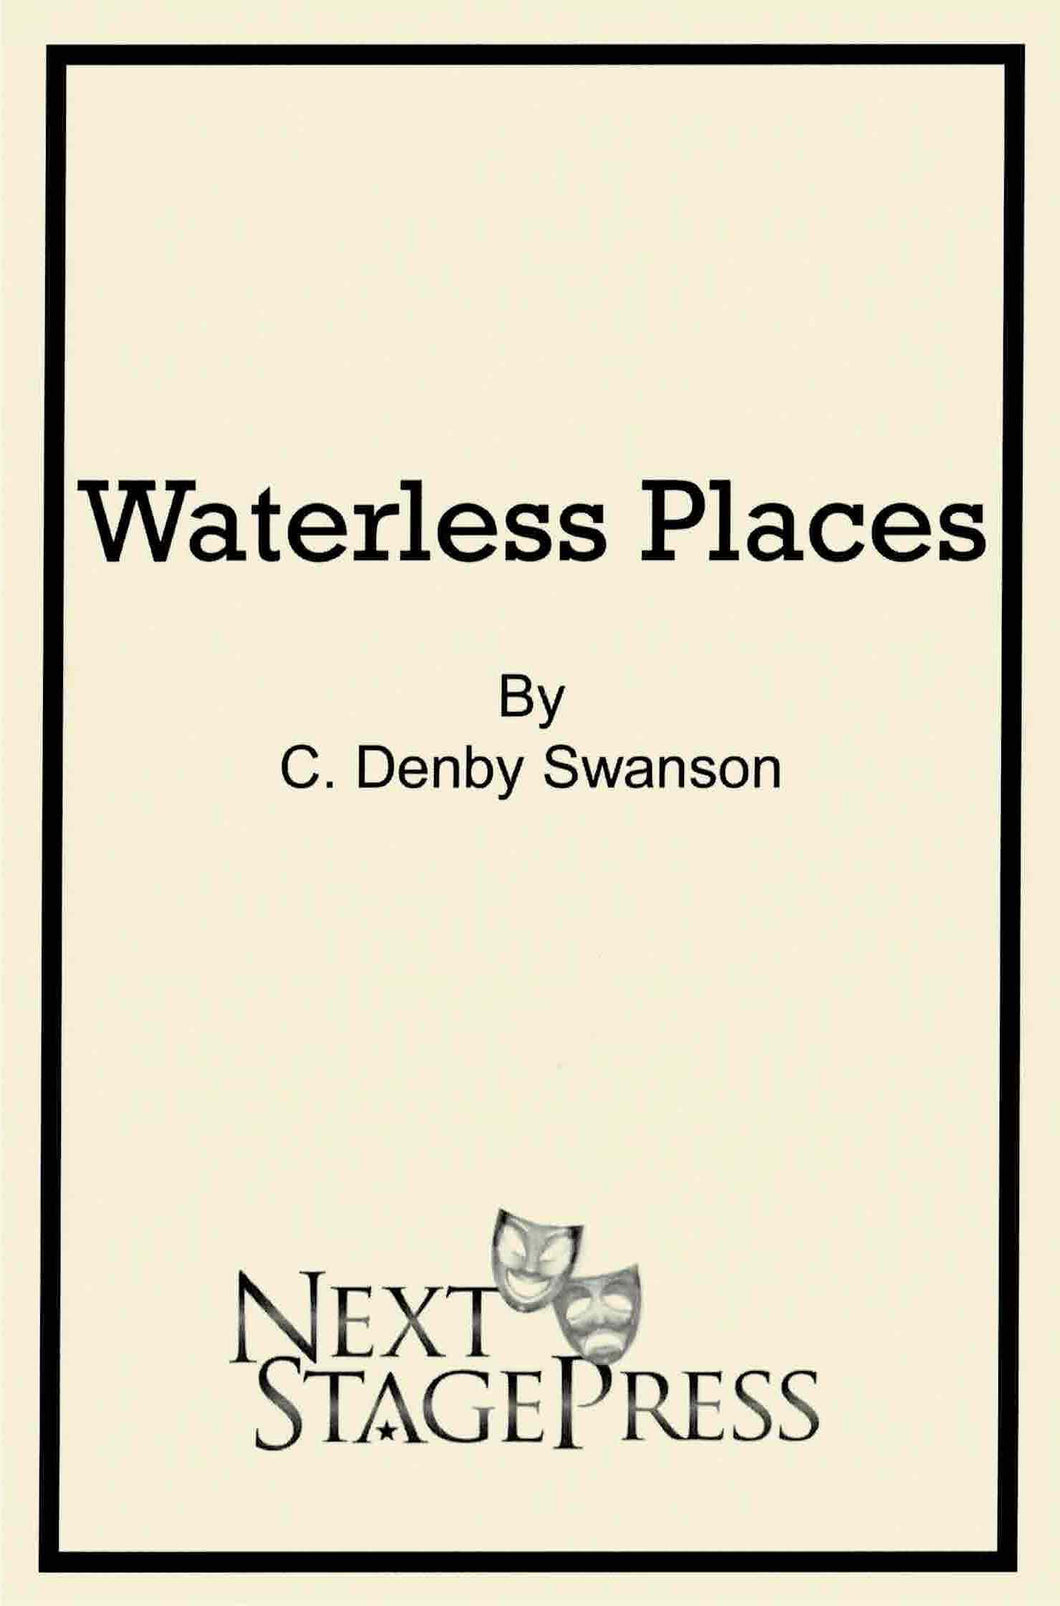 Waterless Places